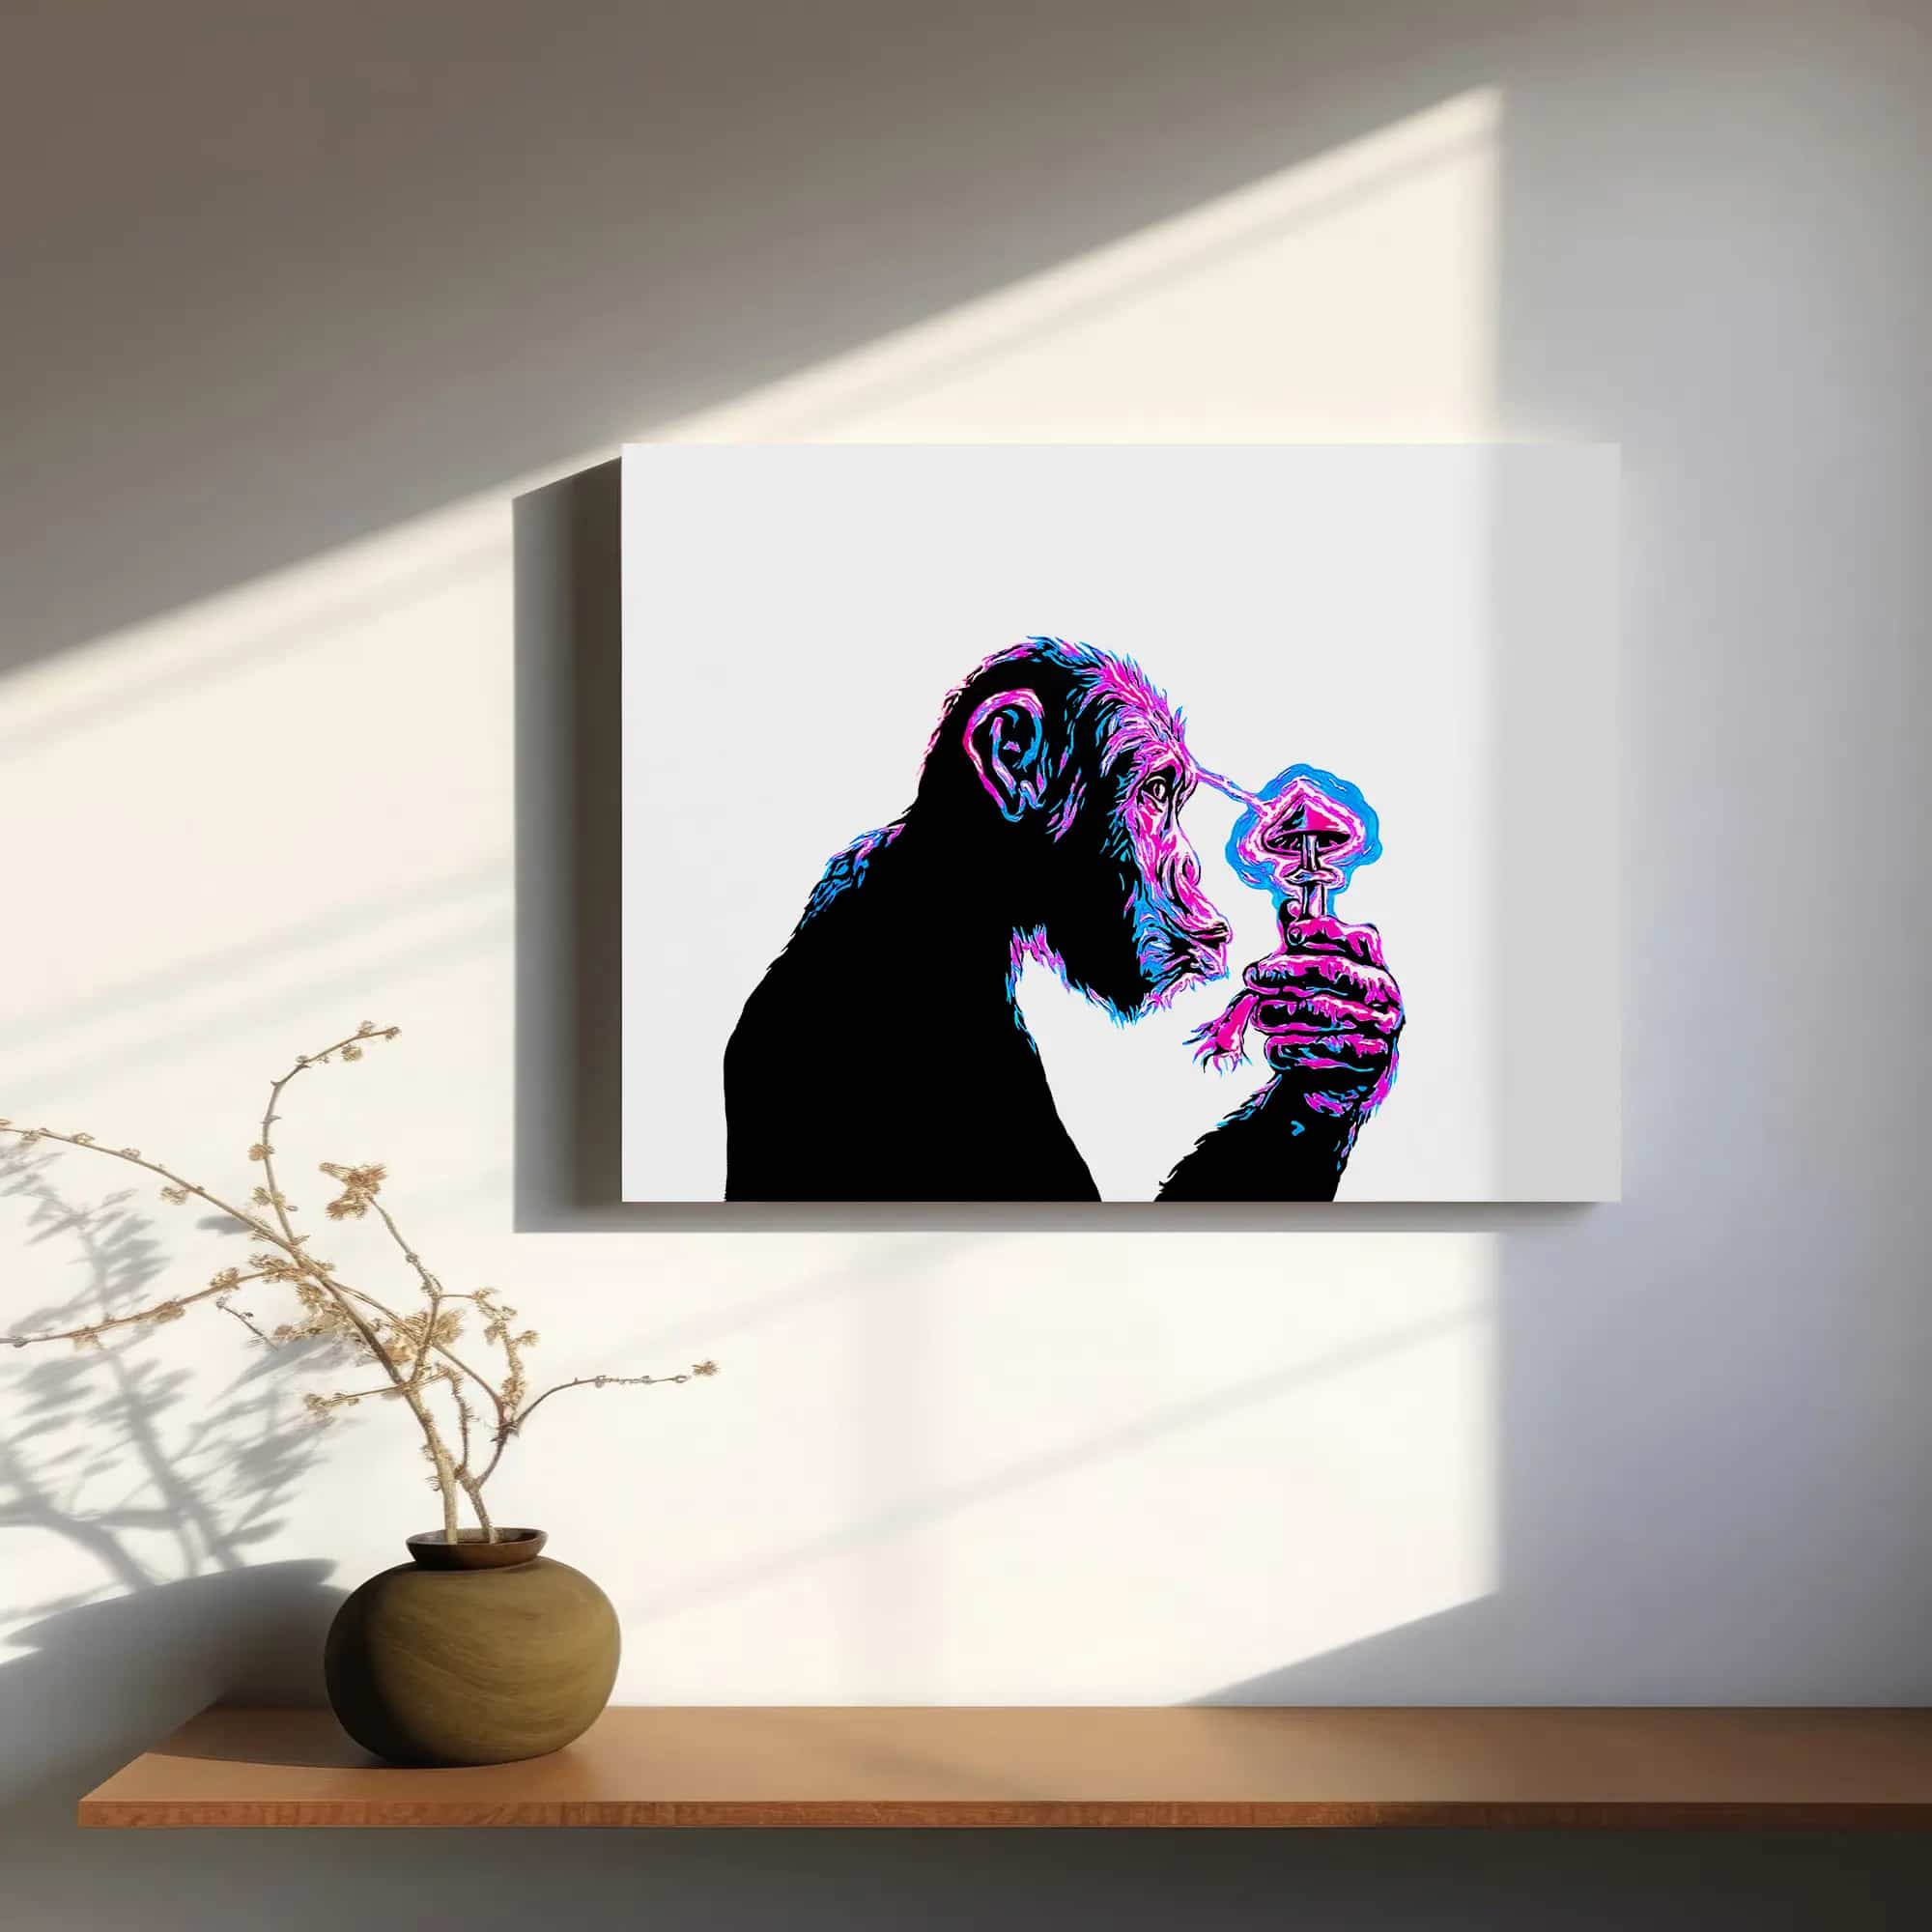 30x40cm Canvas Desk Art - Stoned Ape portrait, retro art piece perfect for your desk, with daytime flair and a glow in the dark surprise.